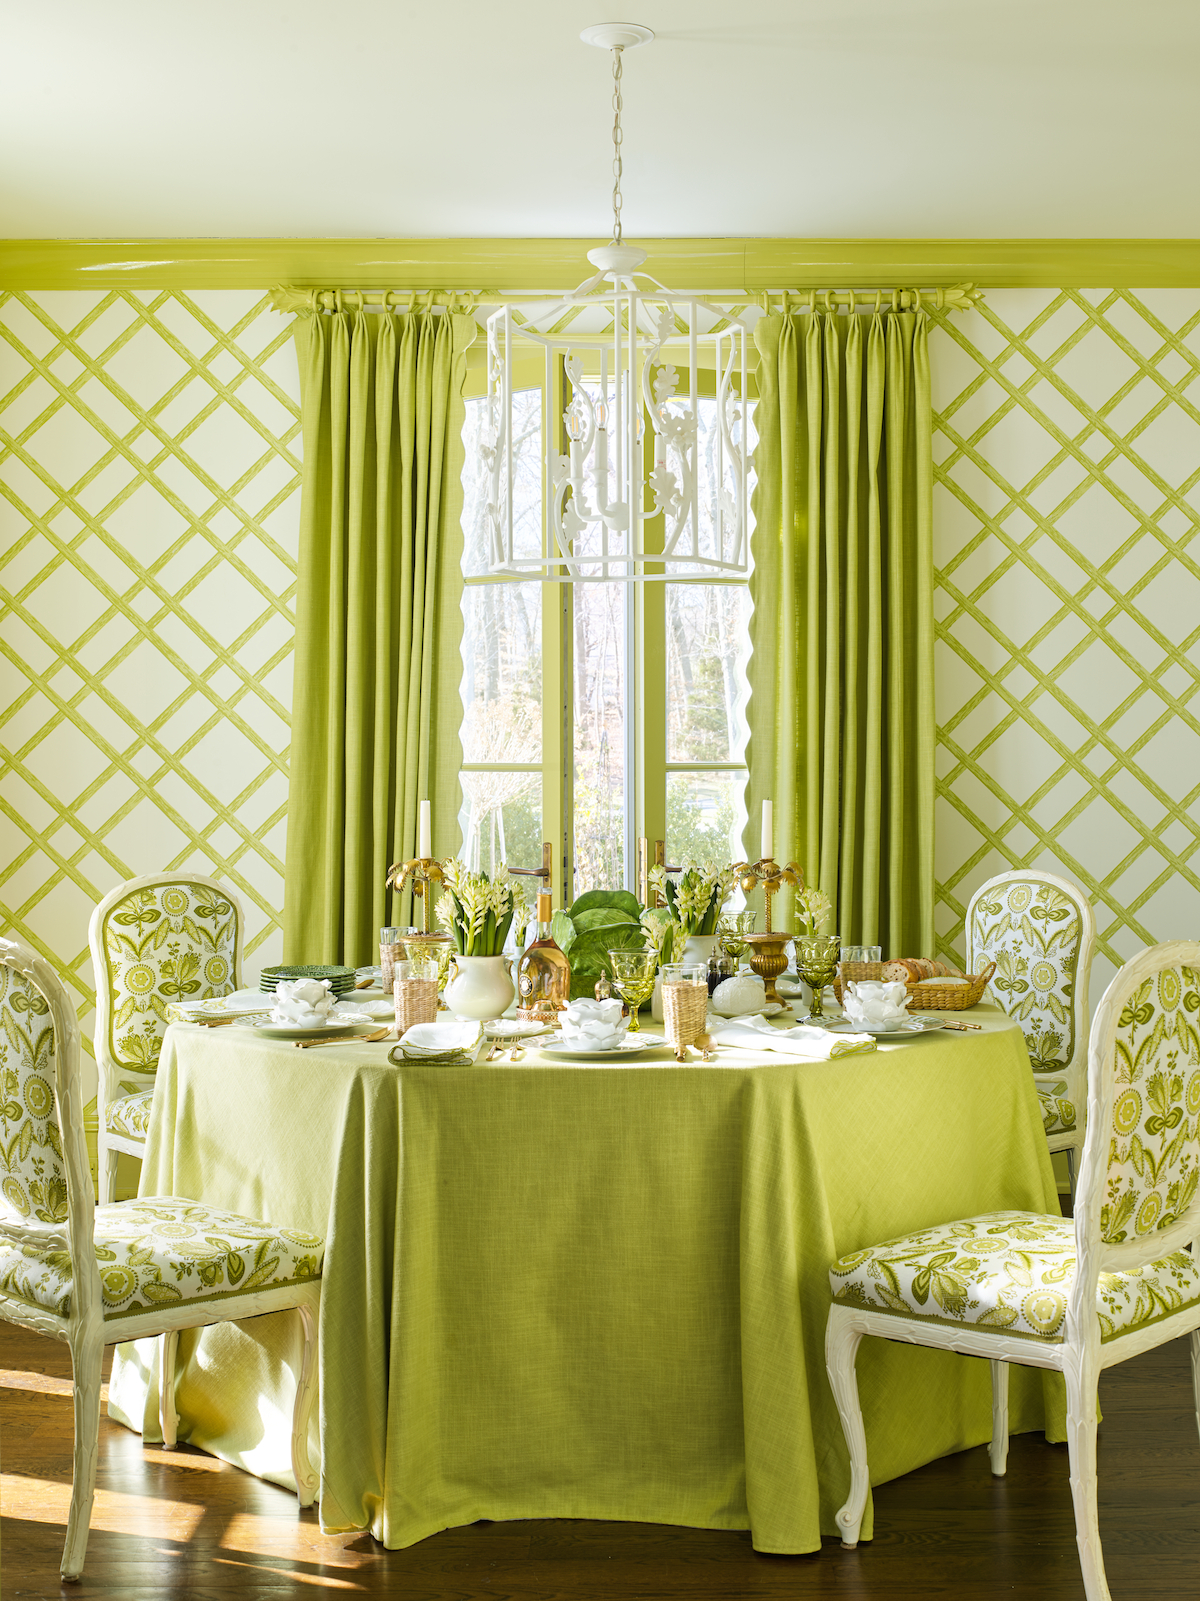 50 Unexpected Room Colors 2021 Best Room Color Combinations